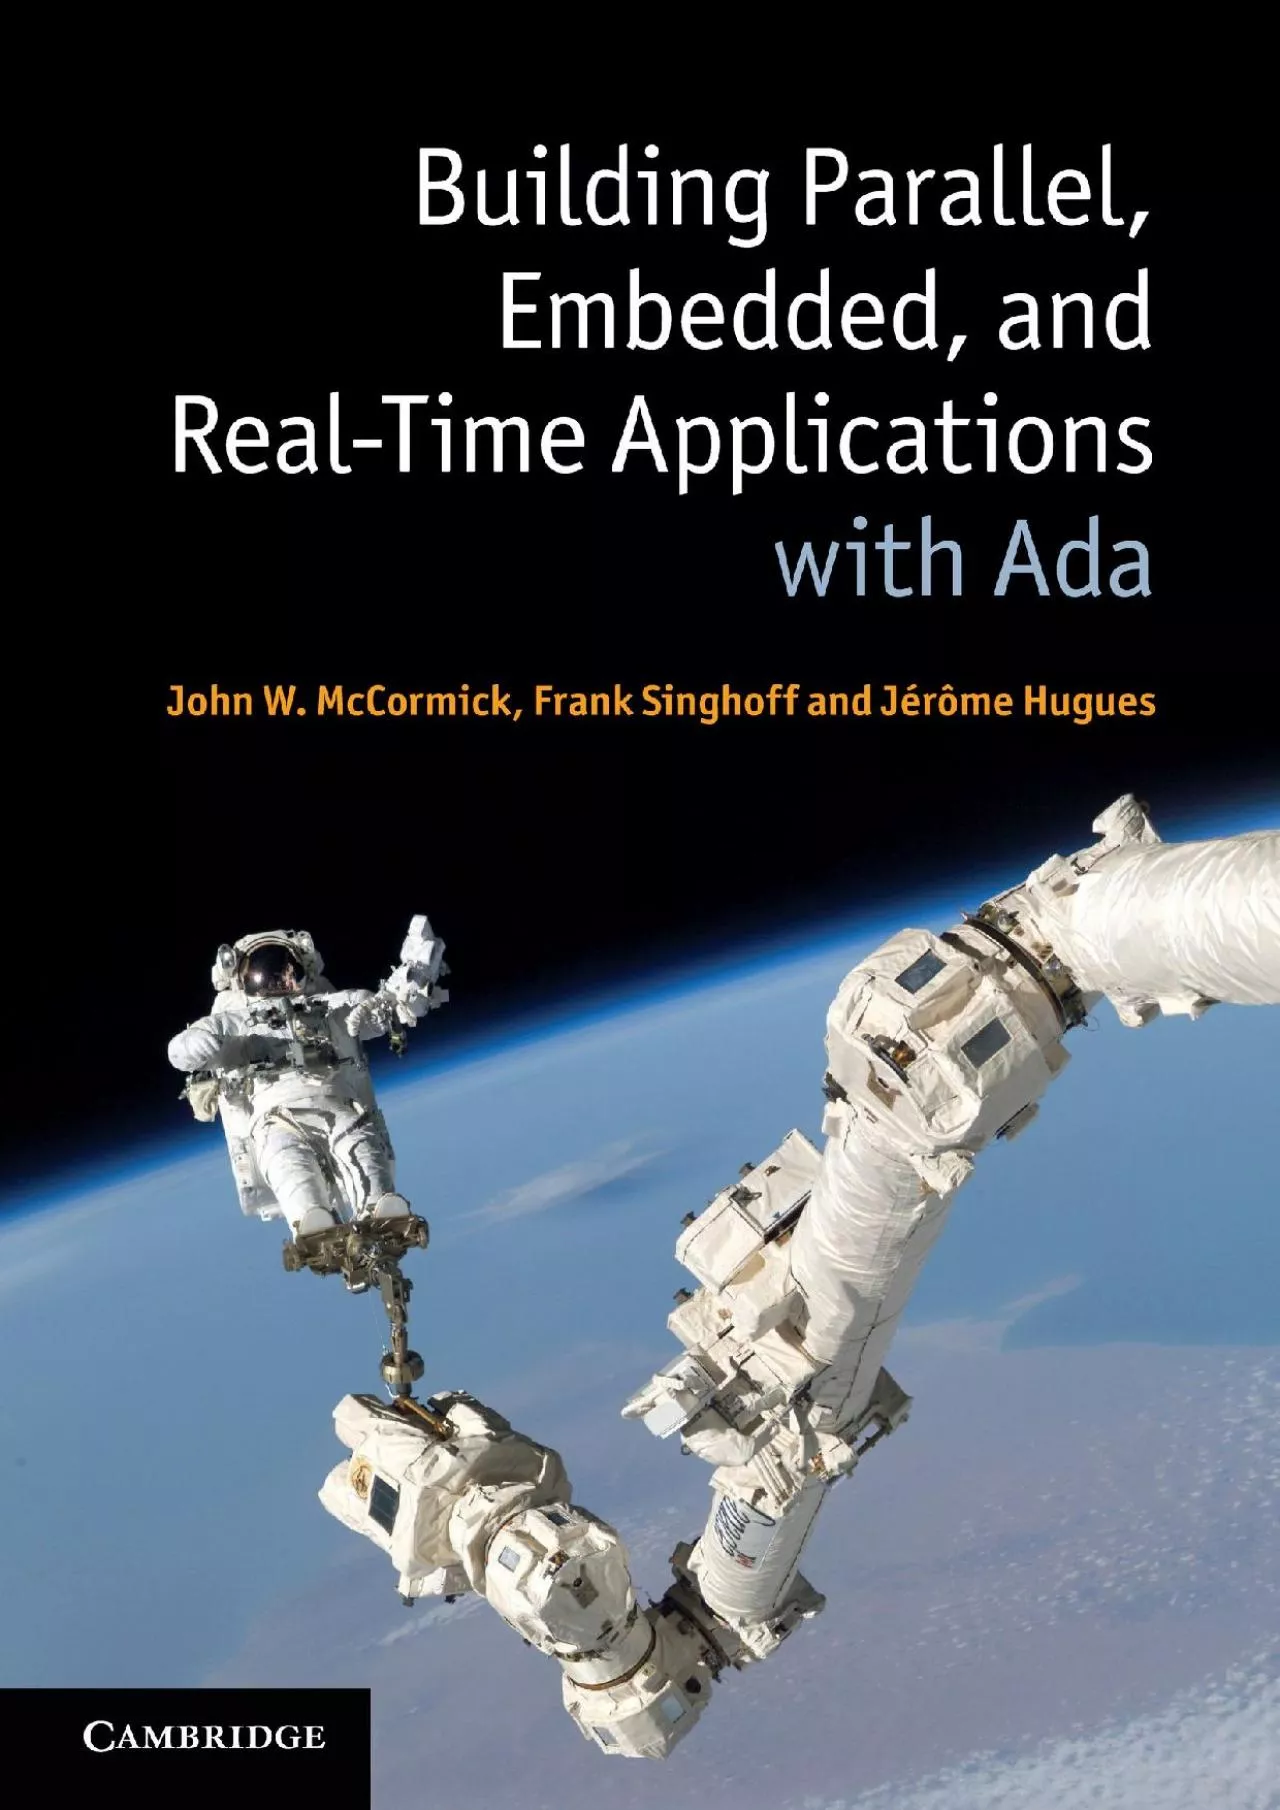 [eBOOK]-Building Parallel, Embedded, and Real-Time Applications with Ada